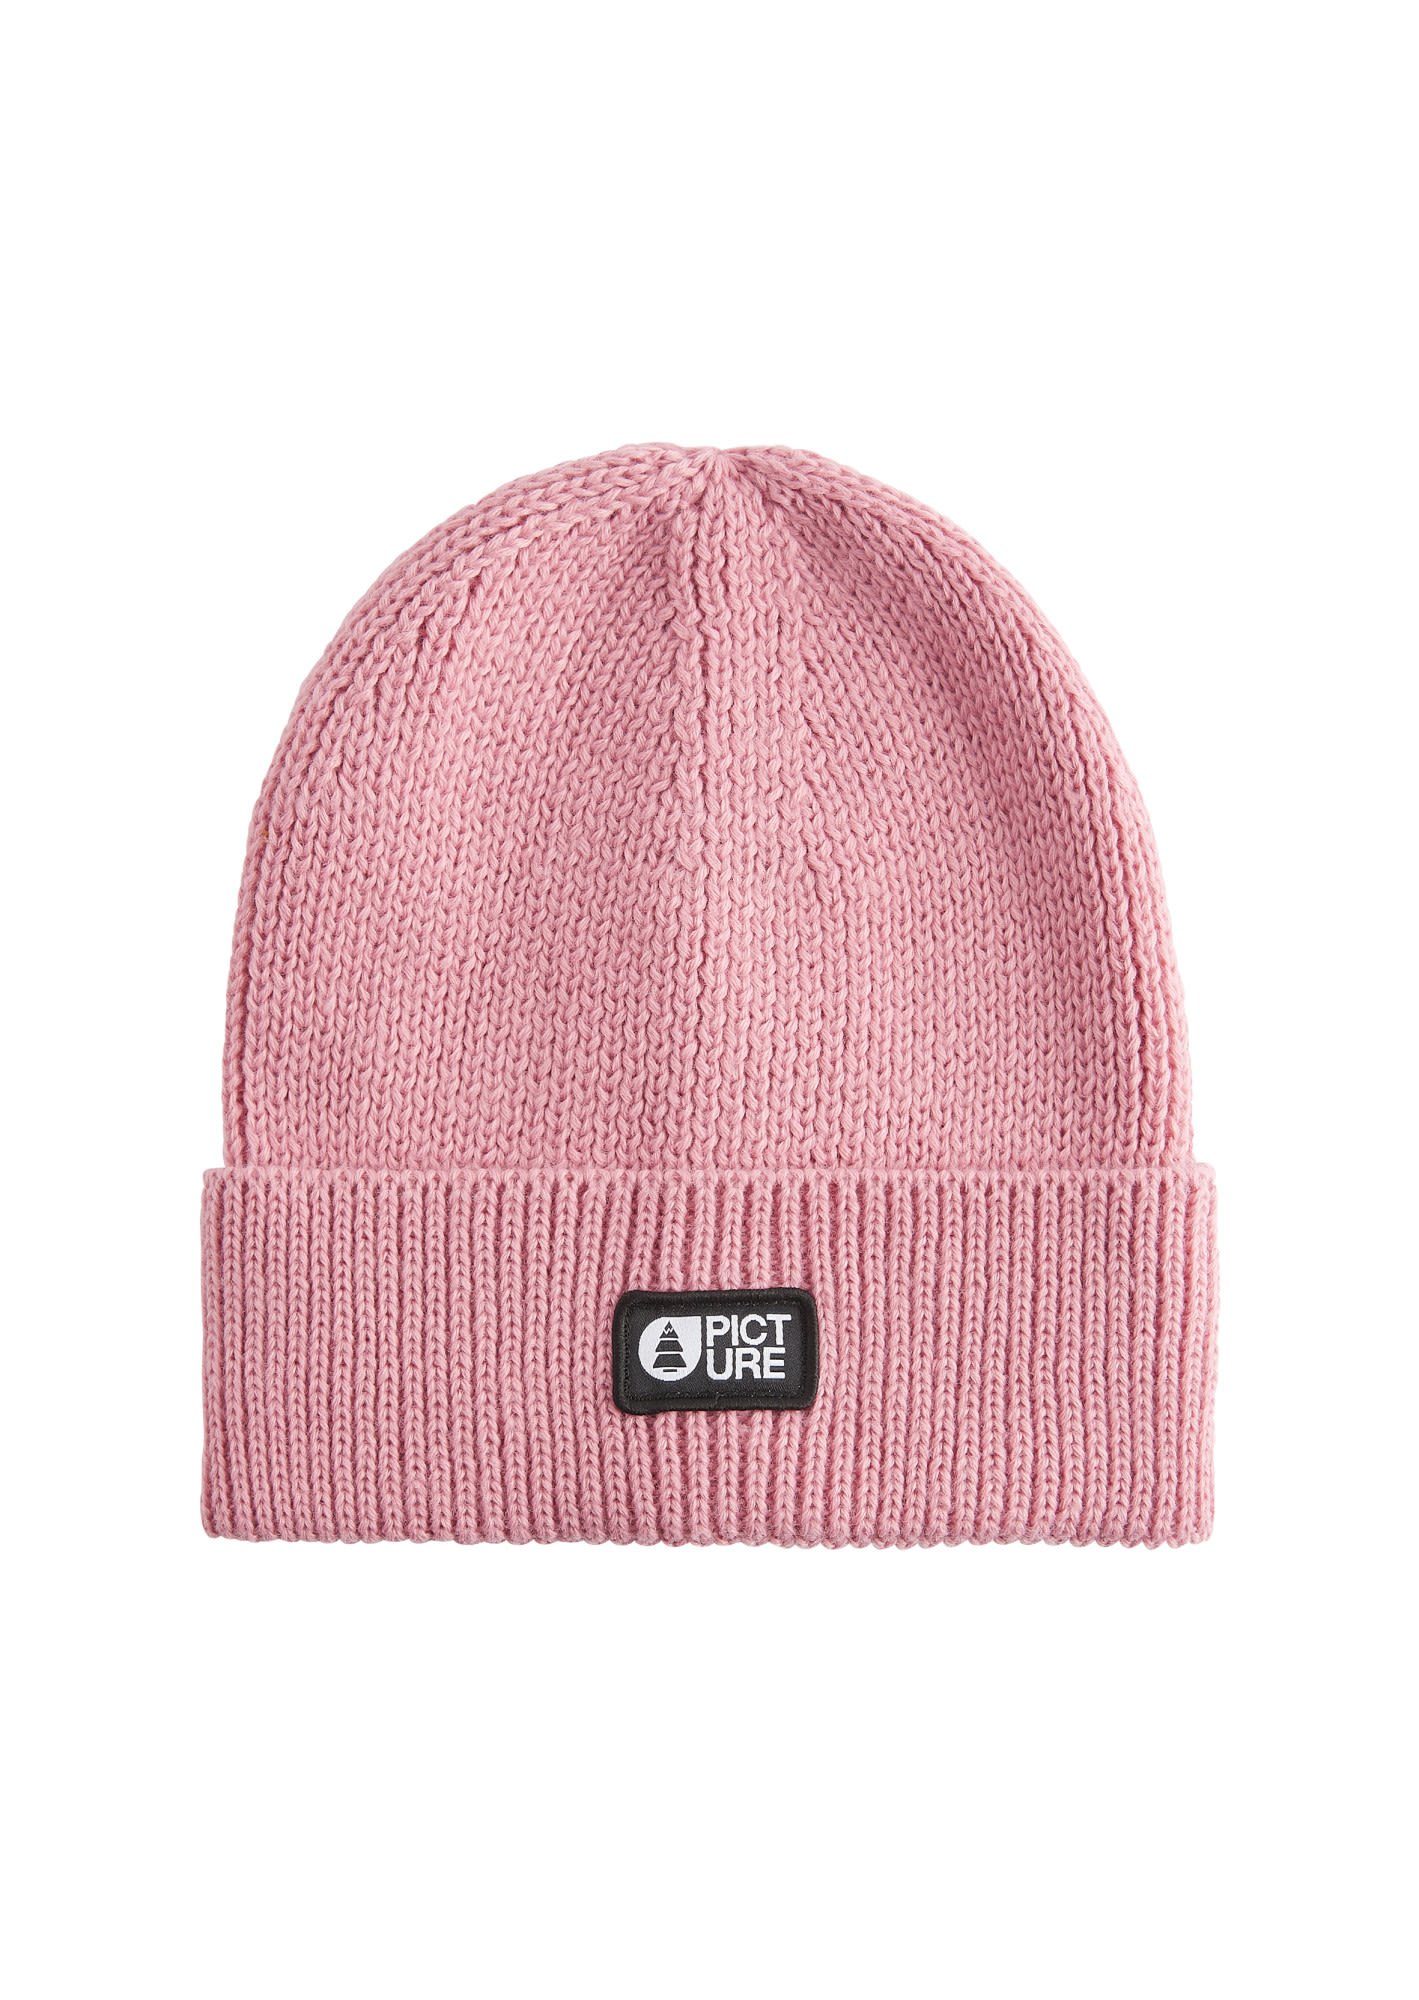 Beanie Accessoires Beanie Picture Picture Colino Cashmere Rose